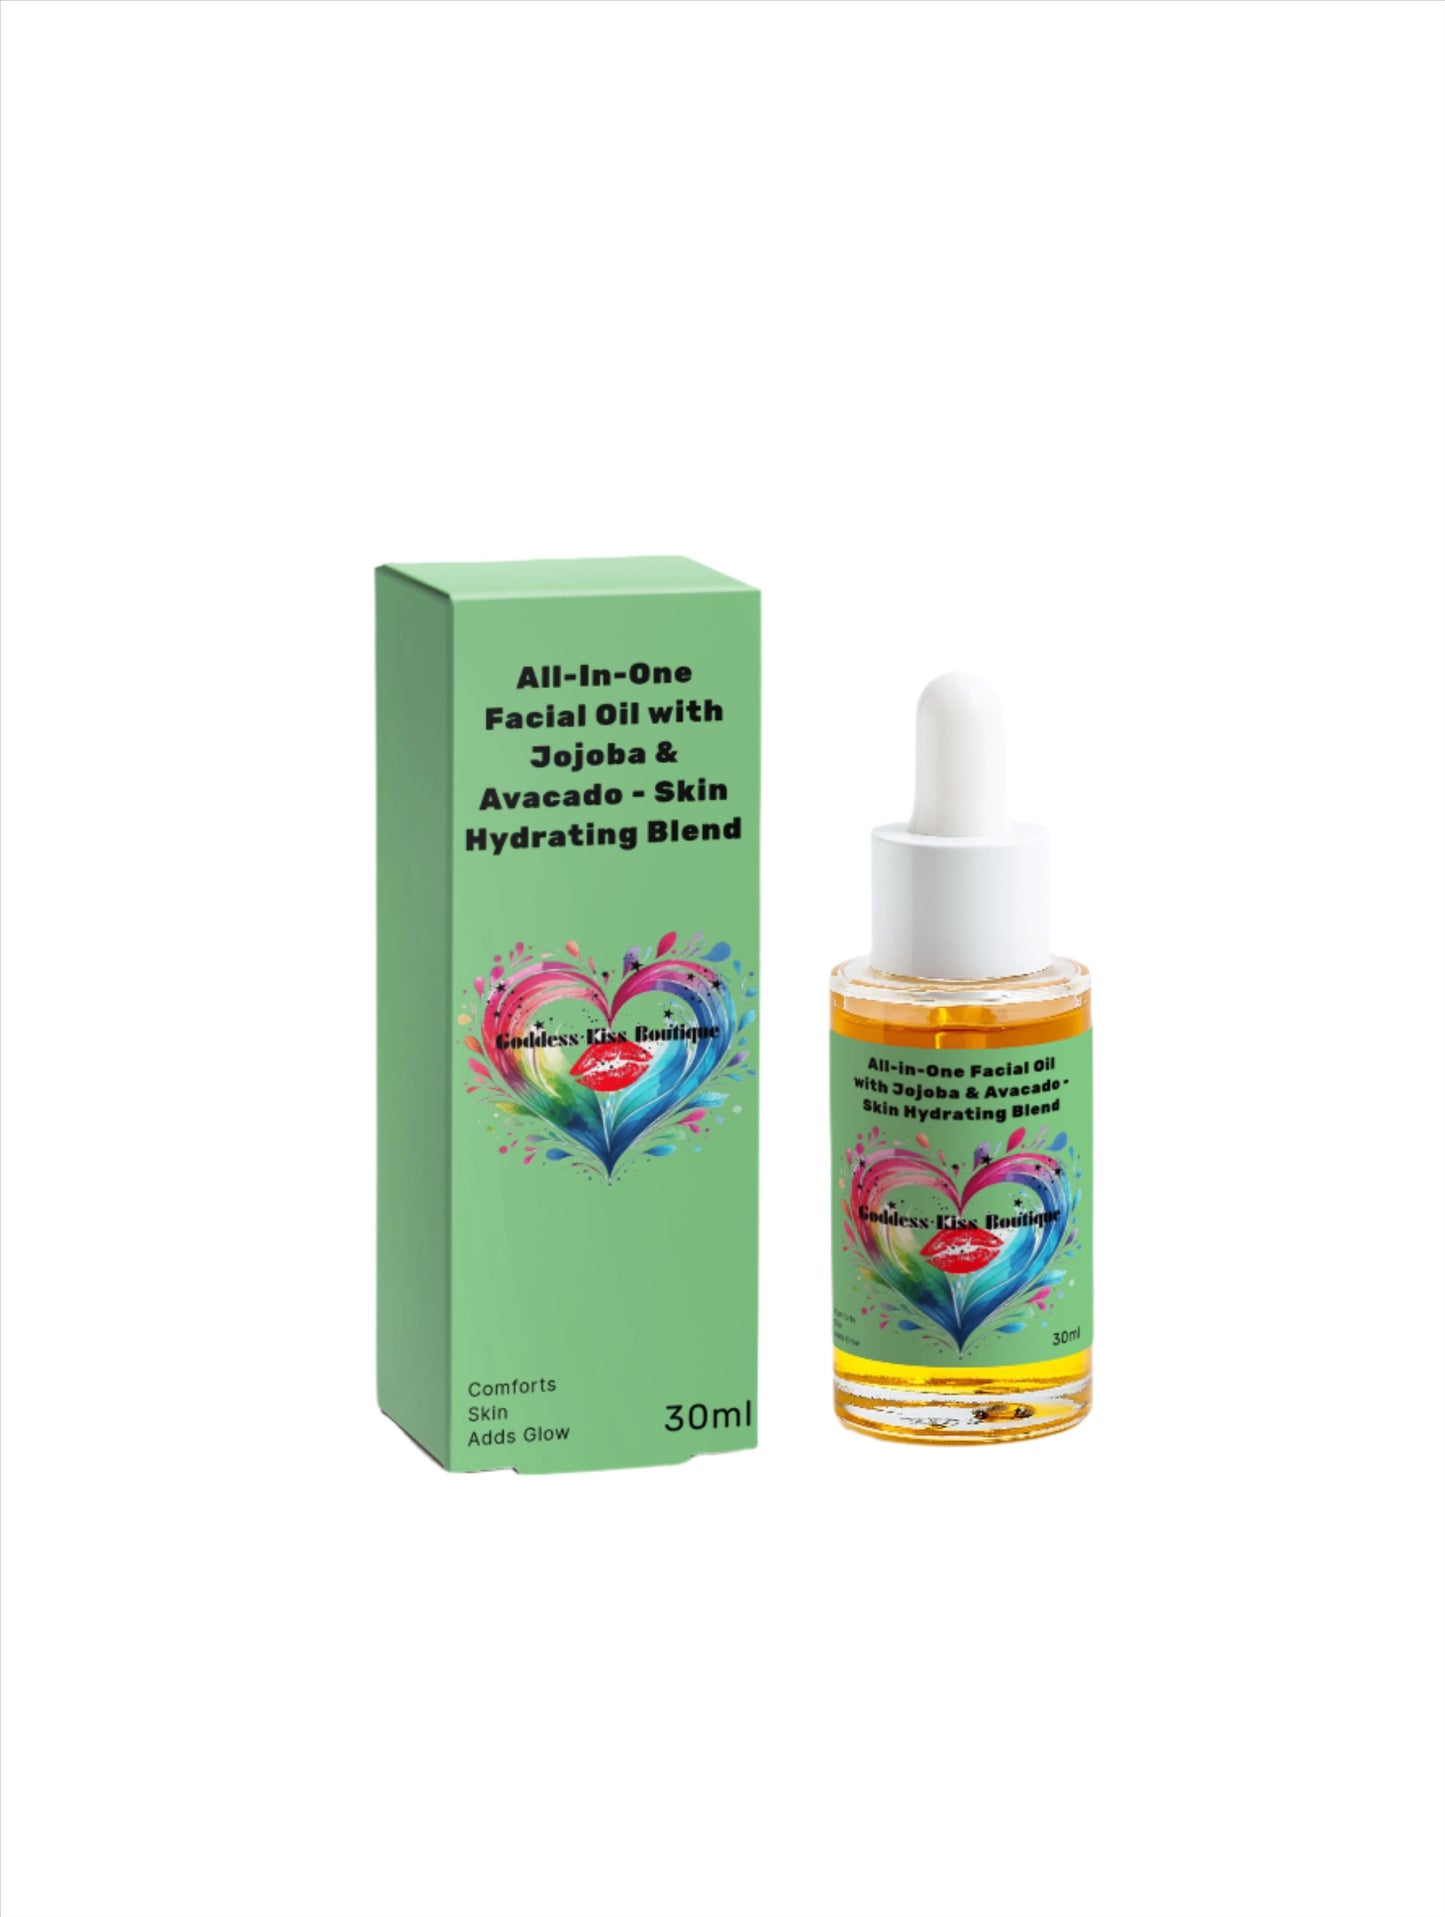 All-In-One Facial Oil with Jojoba & Avocado - Skin Hydrating Blend